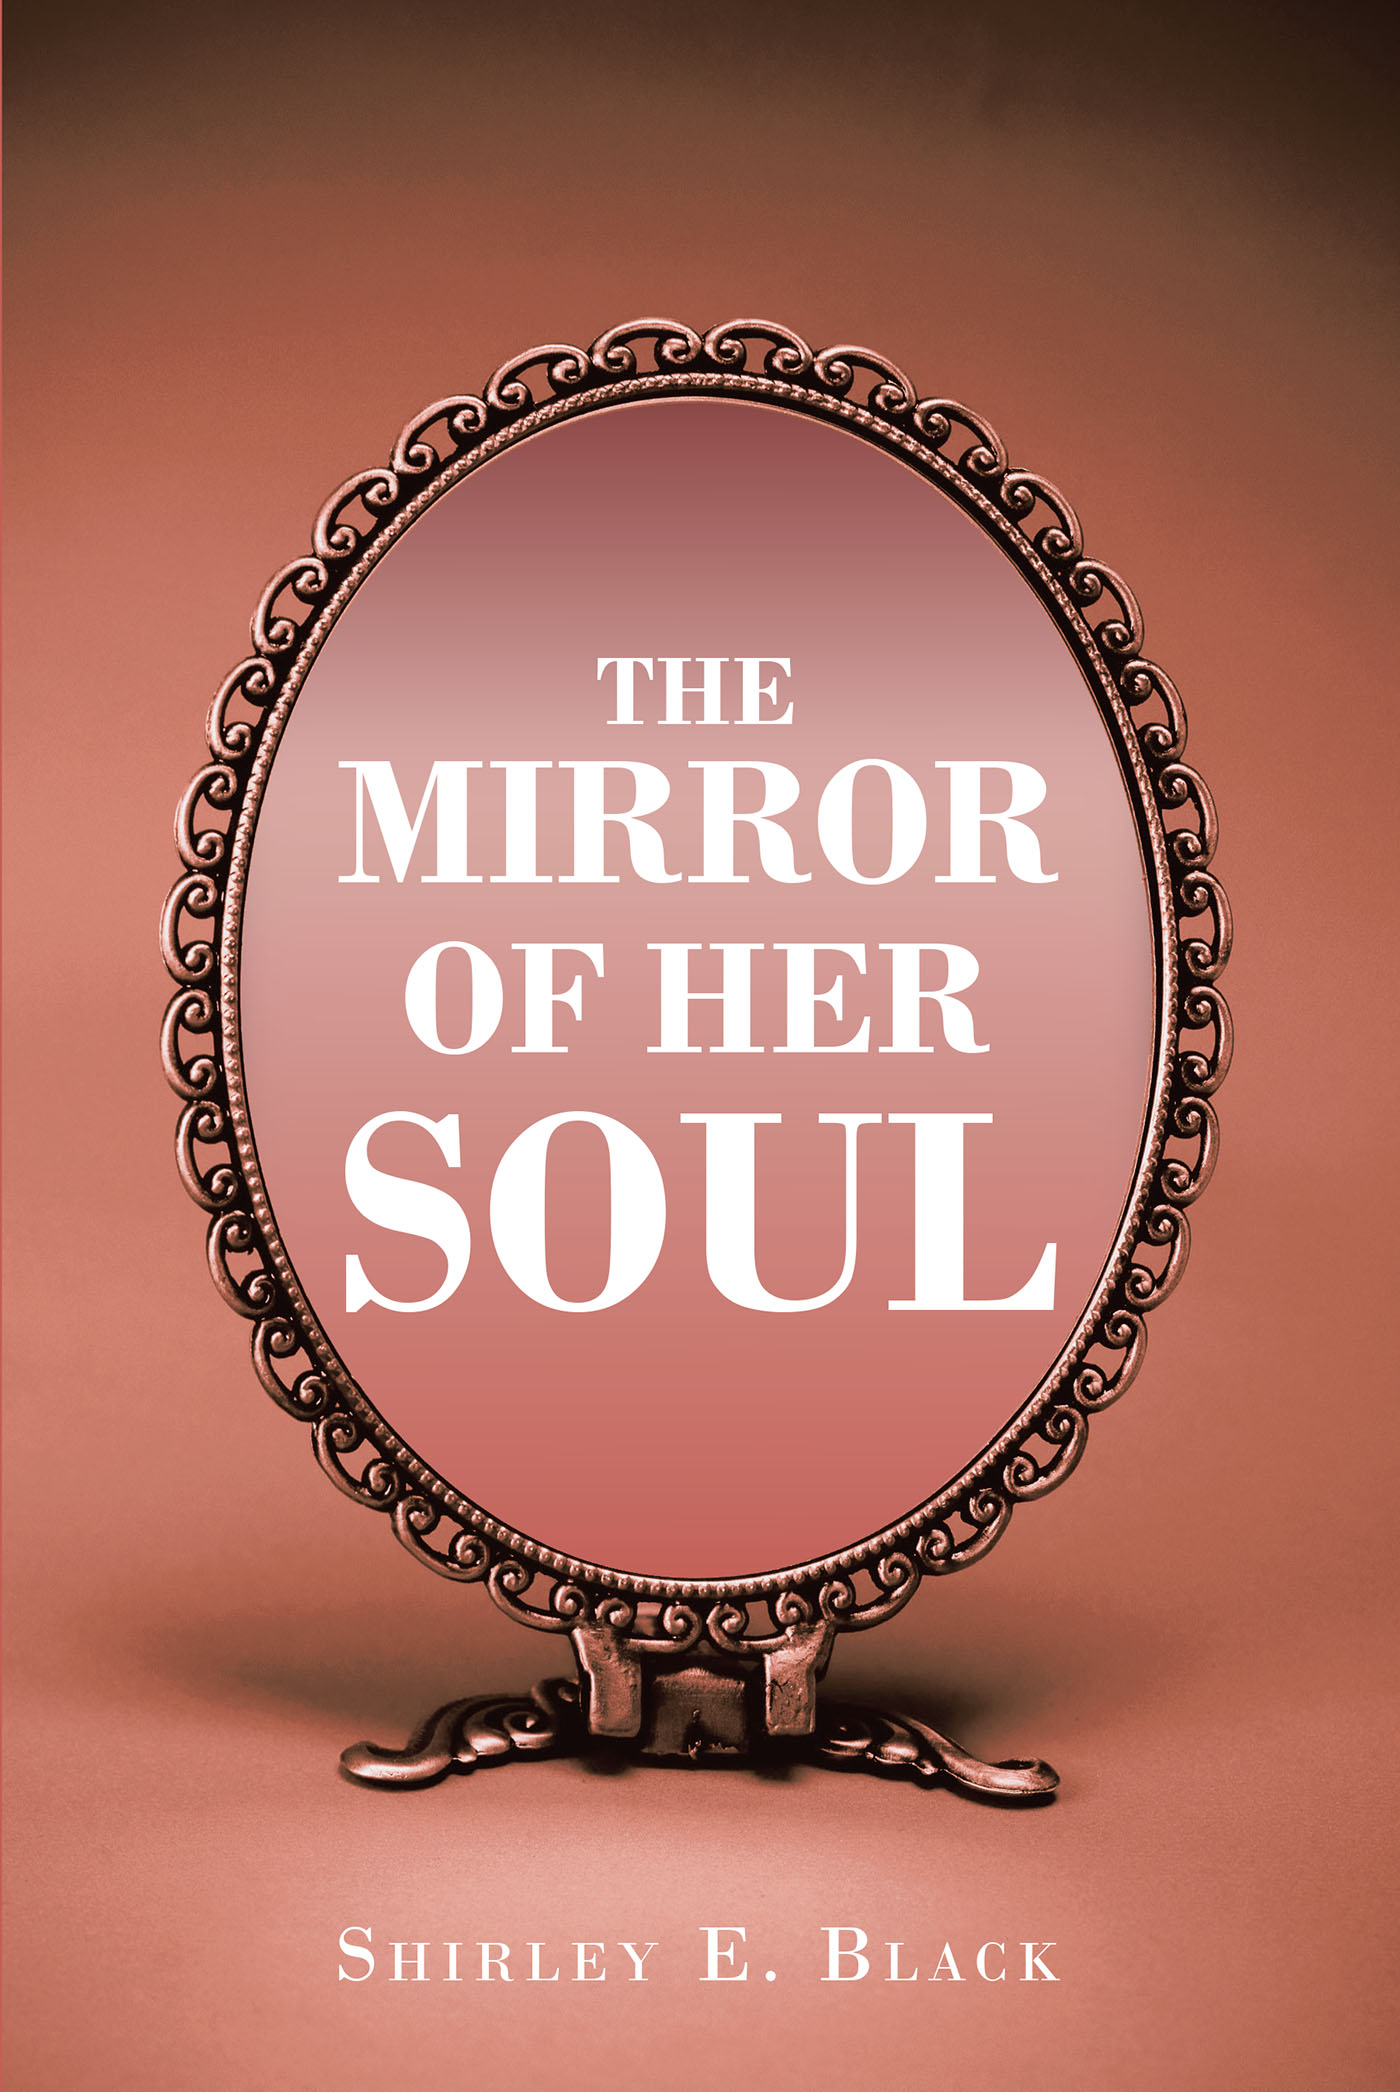 Shirley E. Black’s Newly Released “The Mirror of Her Soul” is a Heartwarming Collection of Spiritually Driven Prayers in Poetic Format